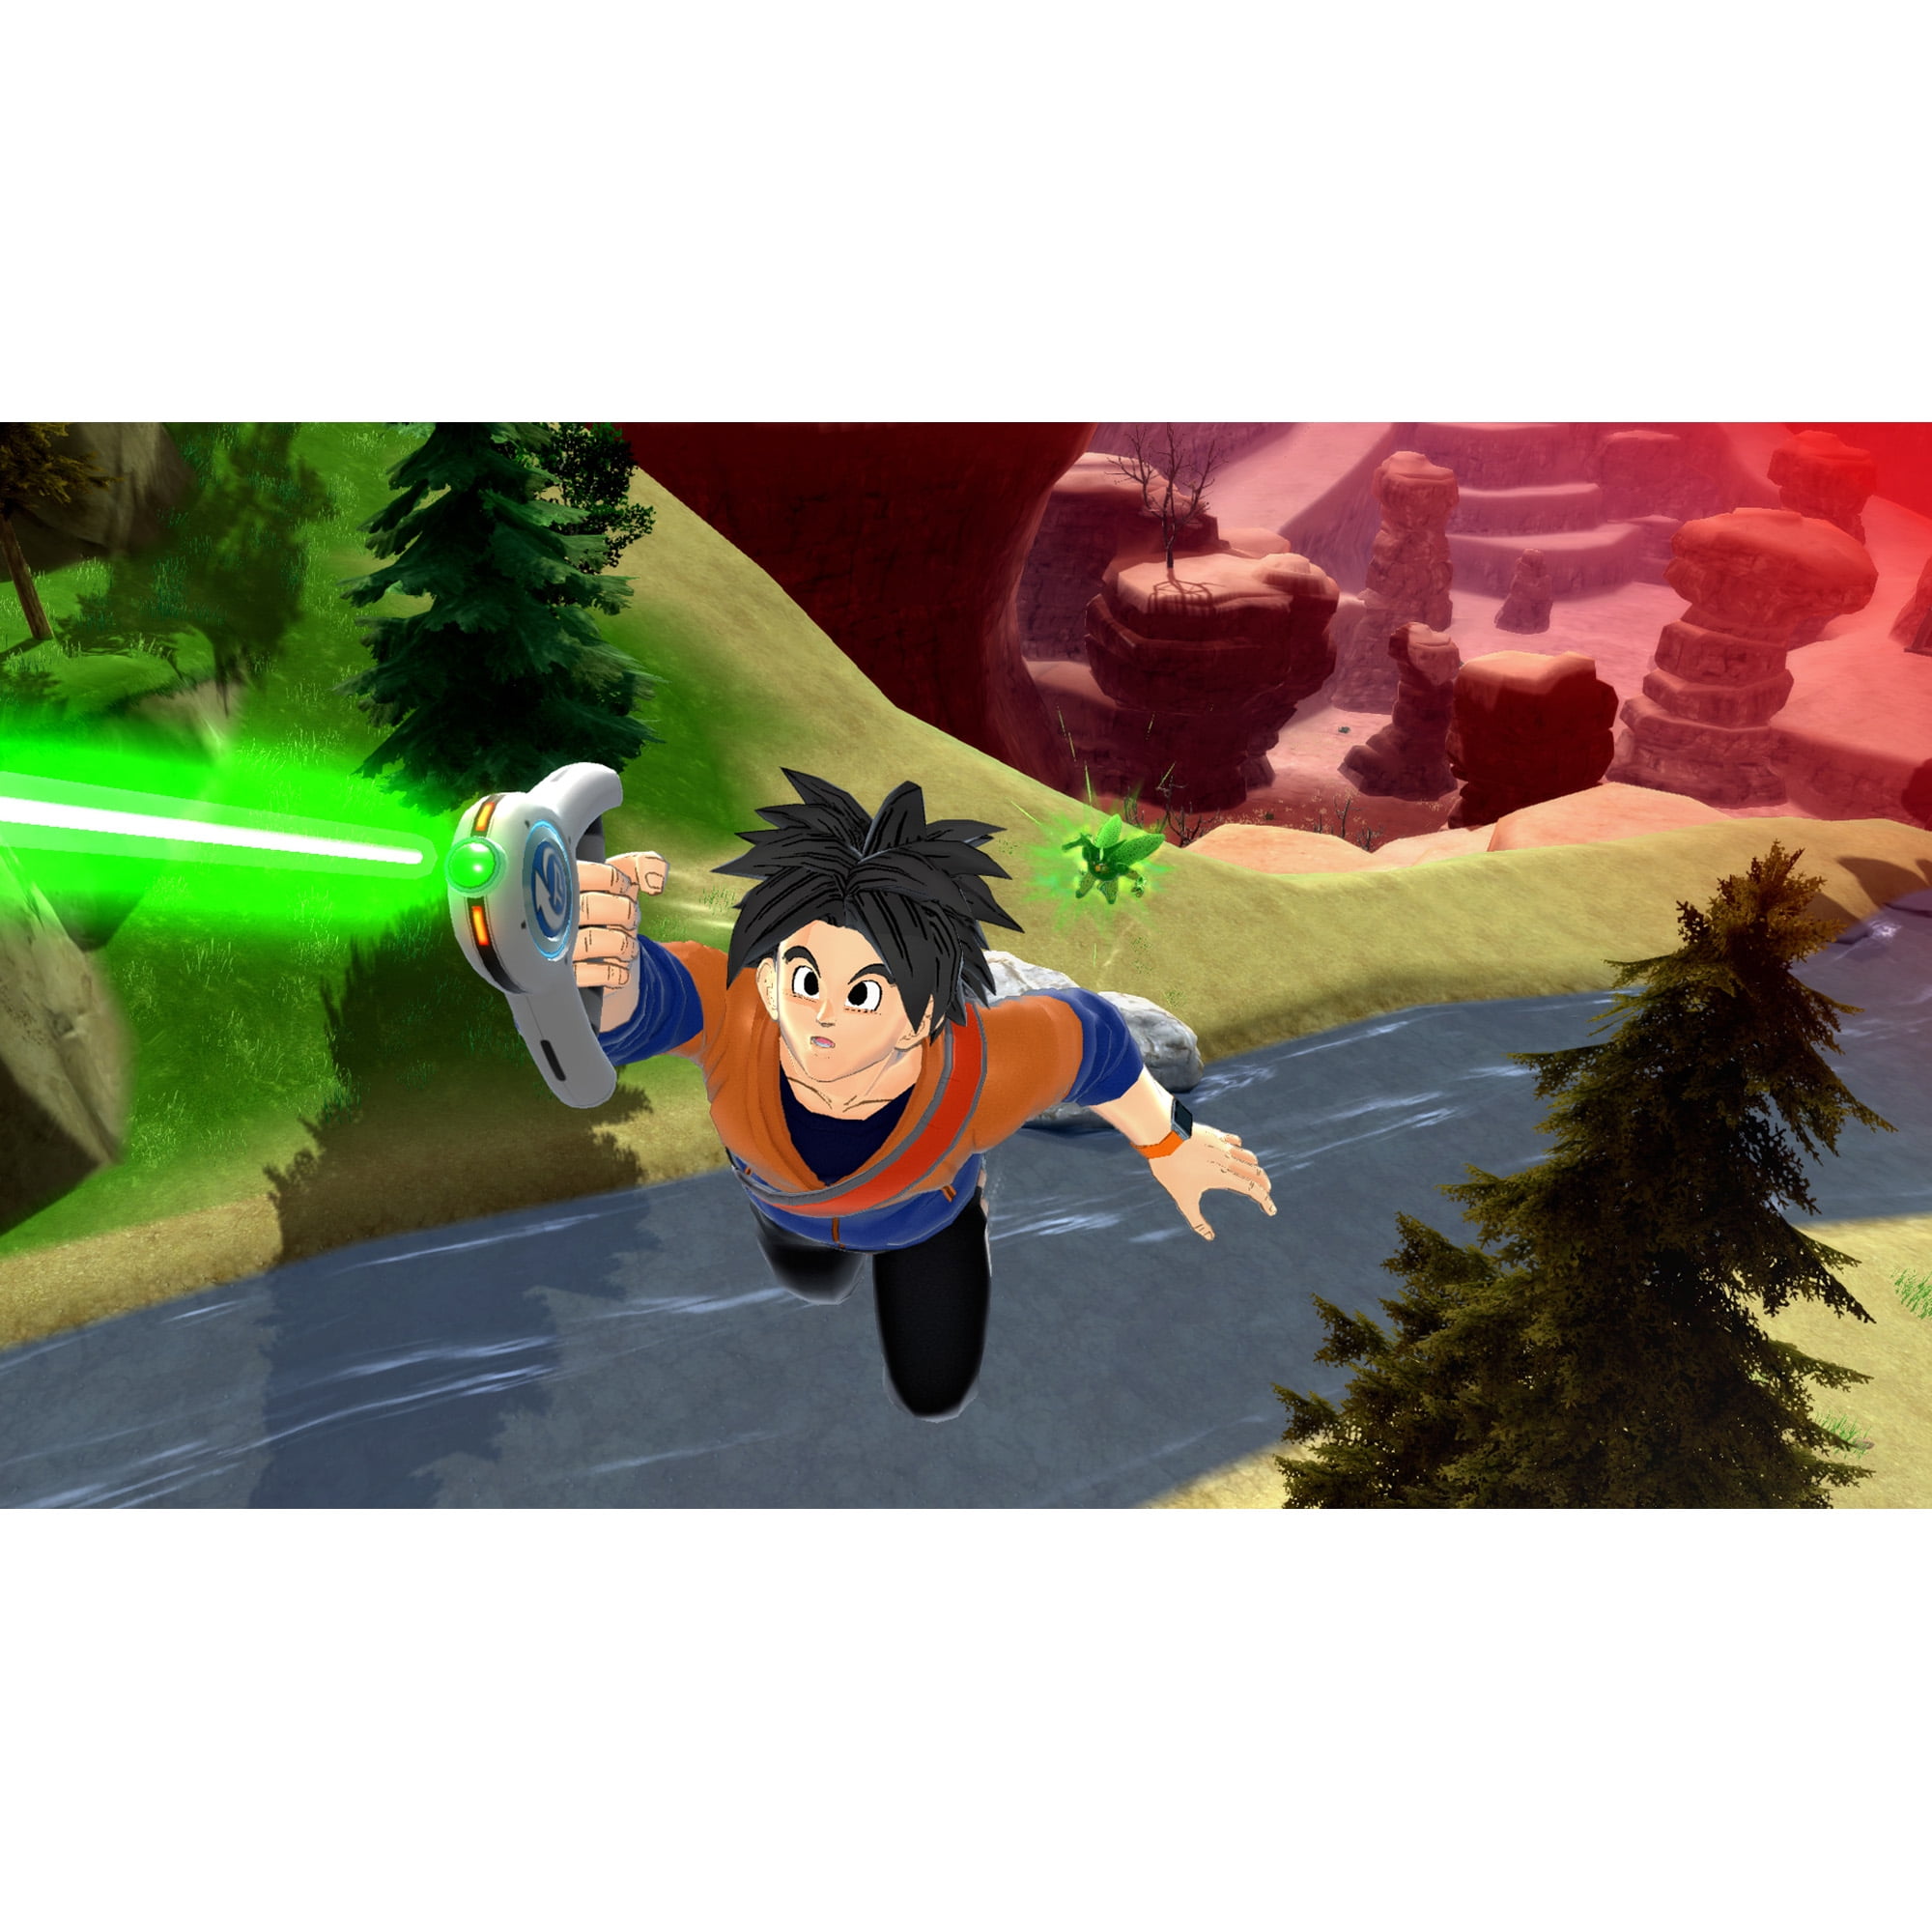 Dragon Ball: The Breakers Available Now - Xbox Wire